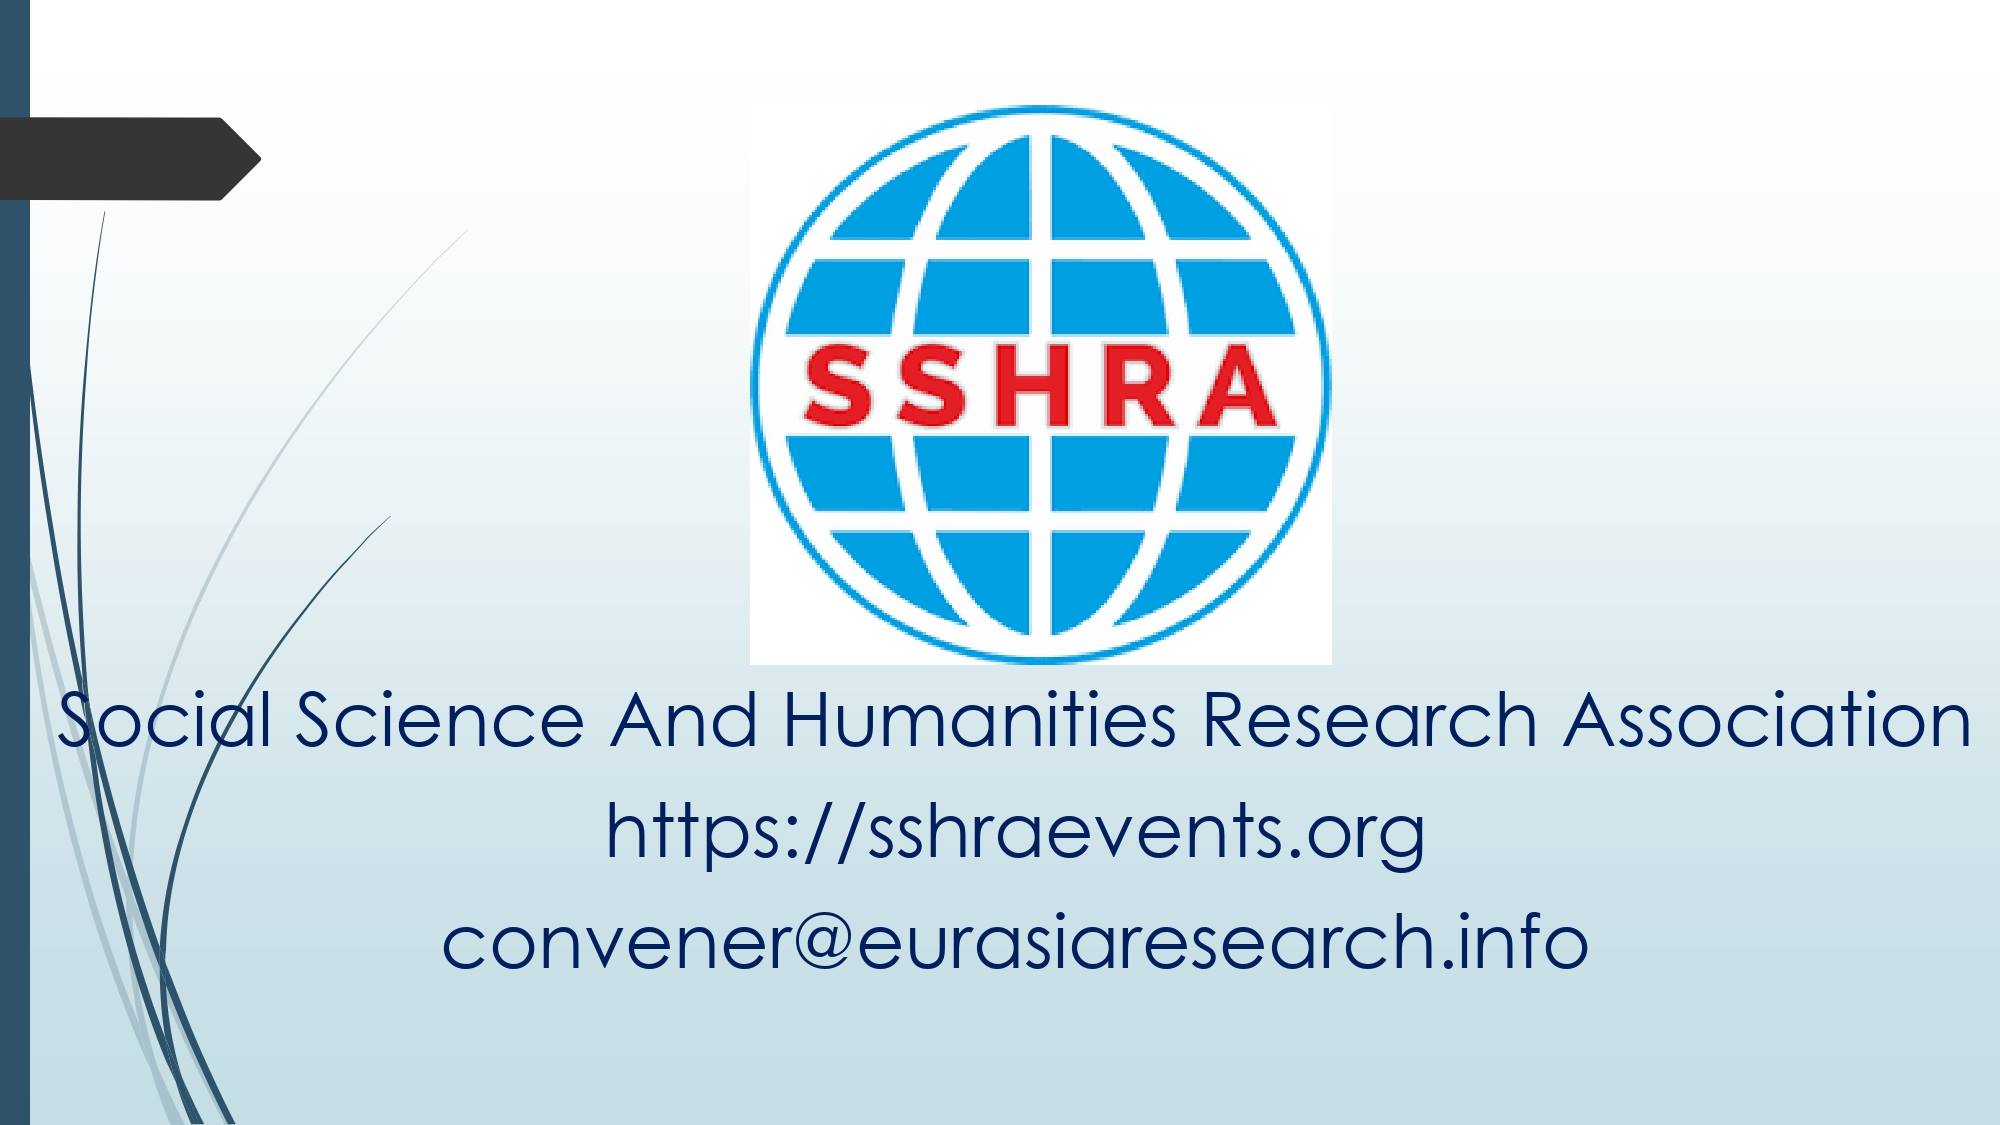 0th Singapore – International Conference on Social Science & Humanities (ICSSH), 23-24 March 2022